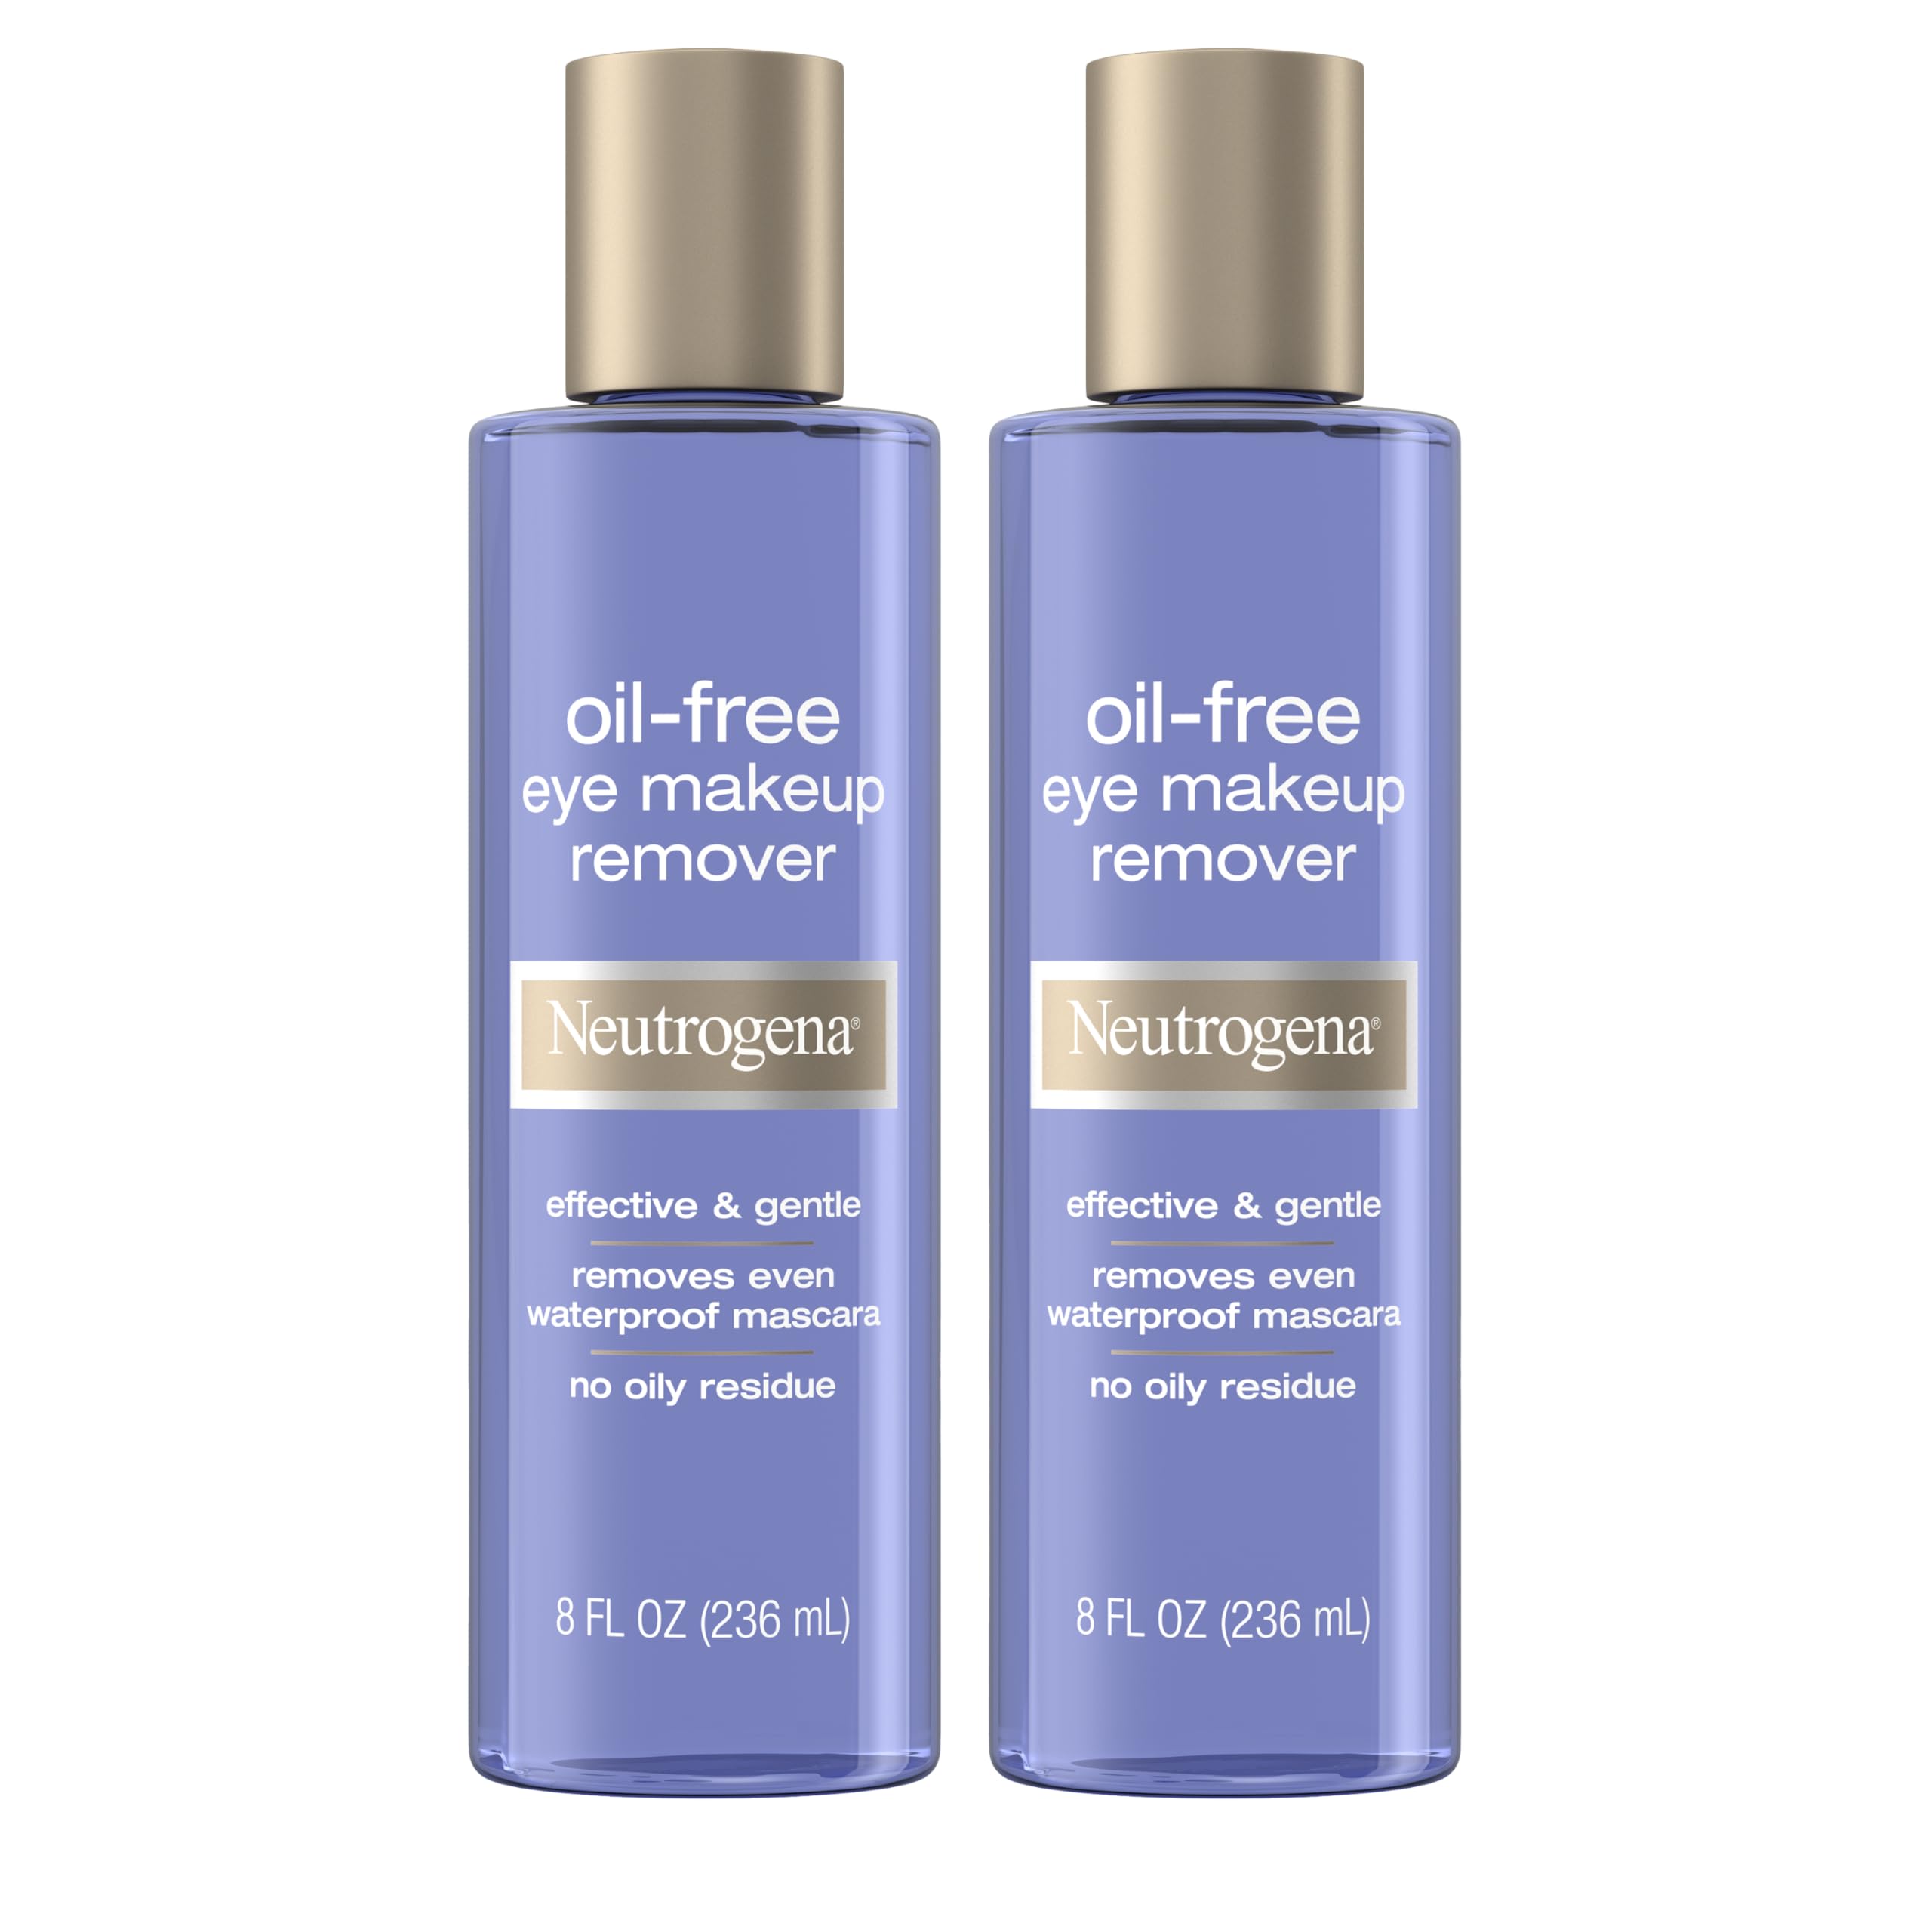 Neutrogena Gentle Oil-Free Eye Makeup Remover & Cleanser, Non-Greasy Makeup Remover, Removes Waterproof Mascara, Ophthalmologist-Tested, Twin Pack, 2 x 8.0 fl. oz